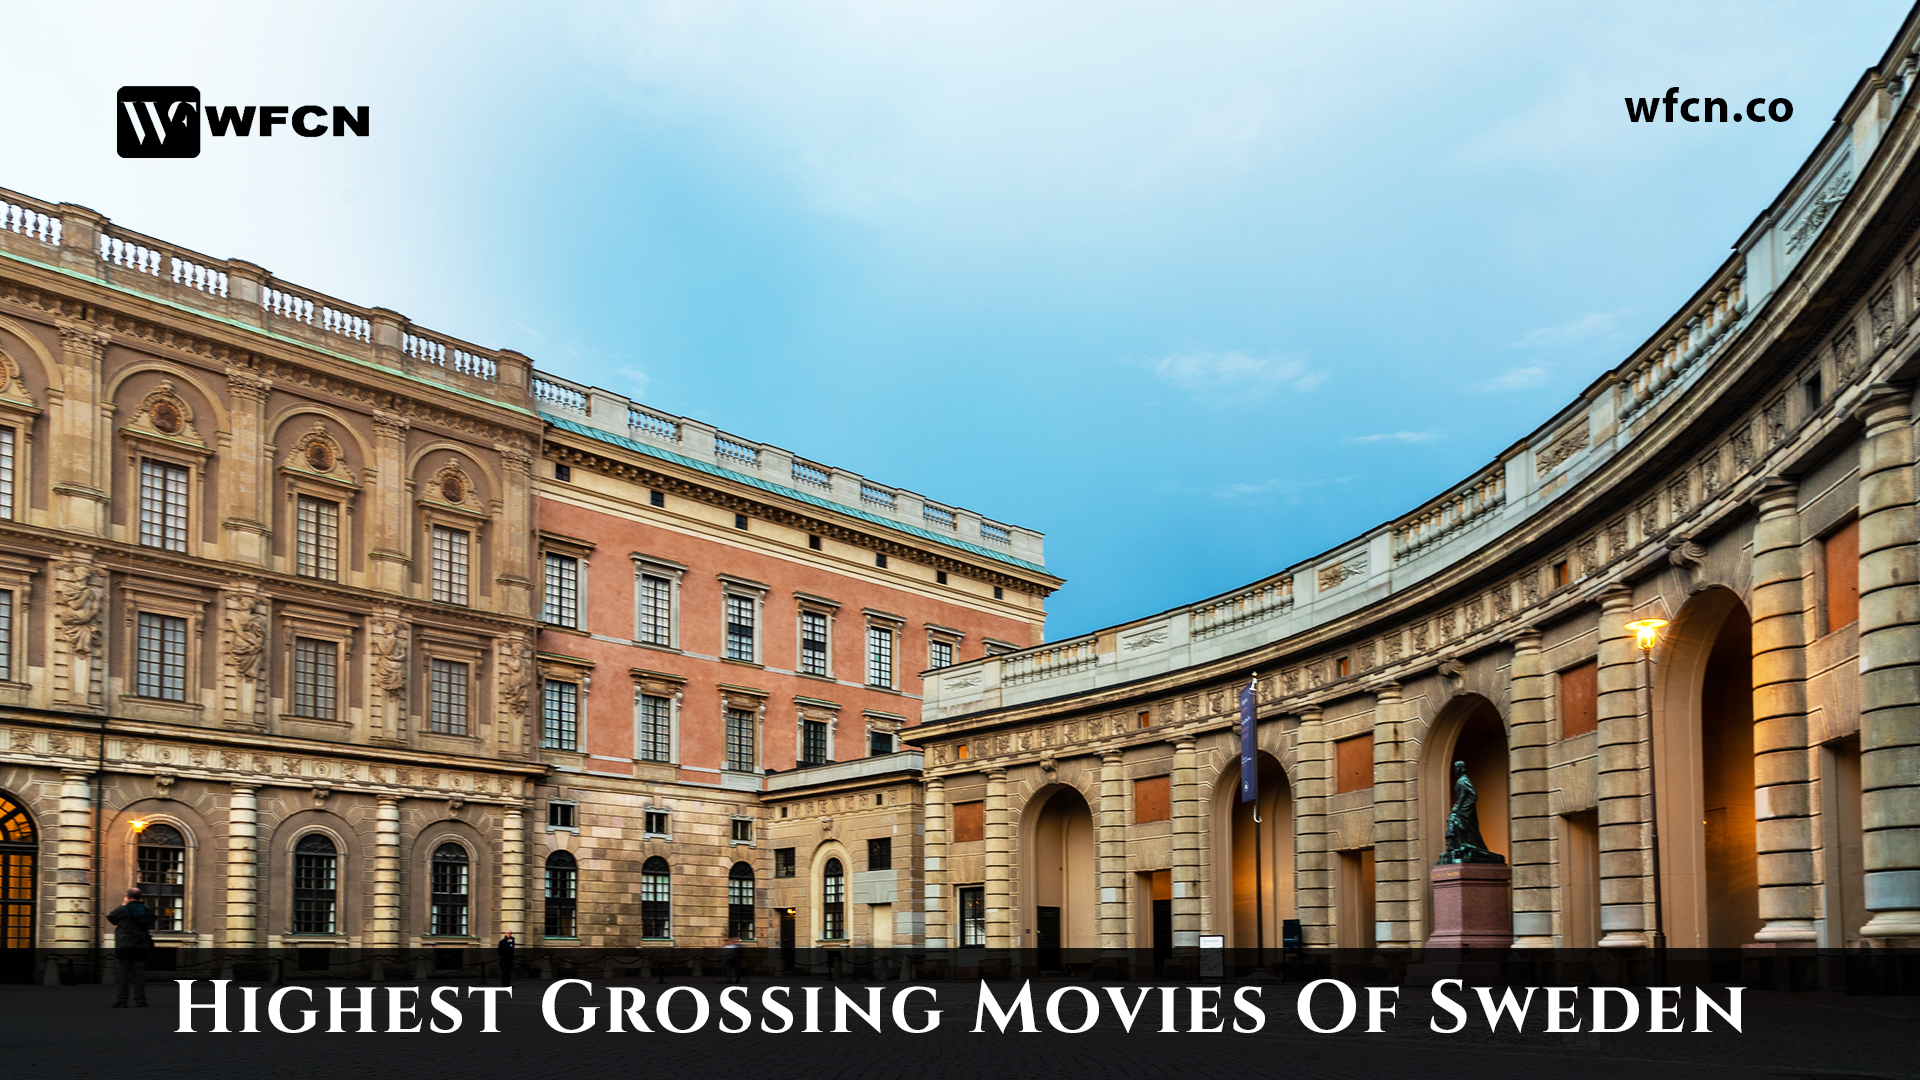 Most Popular Movies of Sweden